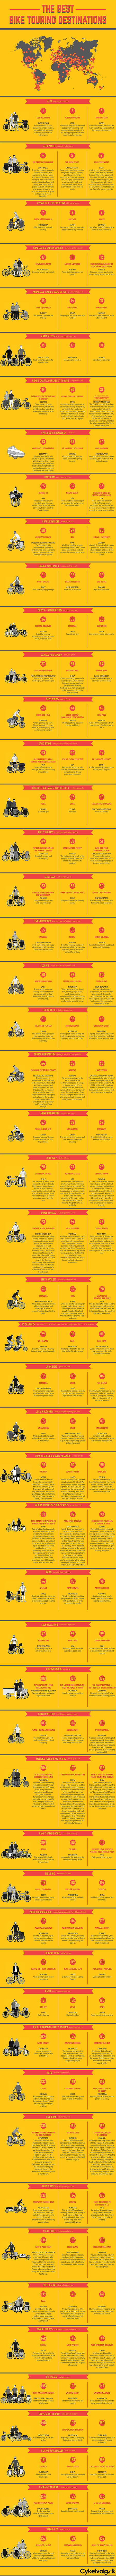 best bicycle touring destinations infographic